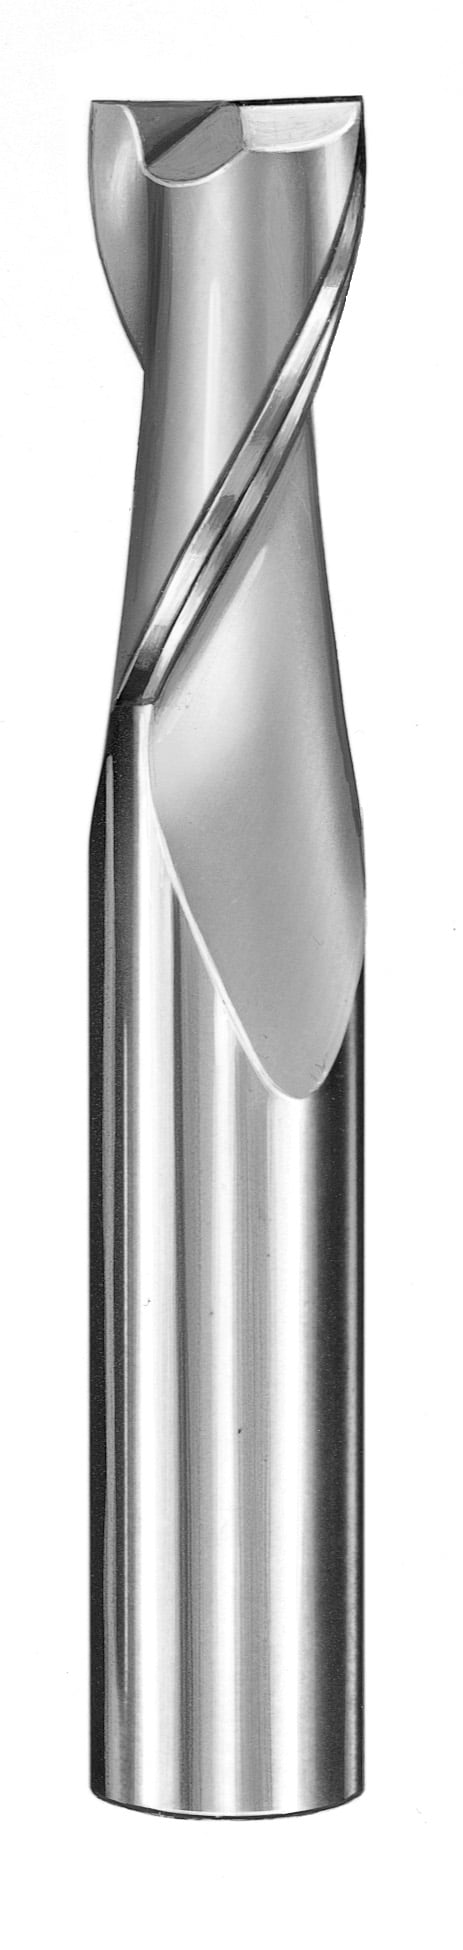 1/8" Dia, 2 Flute, Square End End Mill - 30377